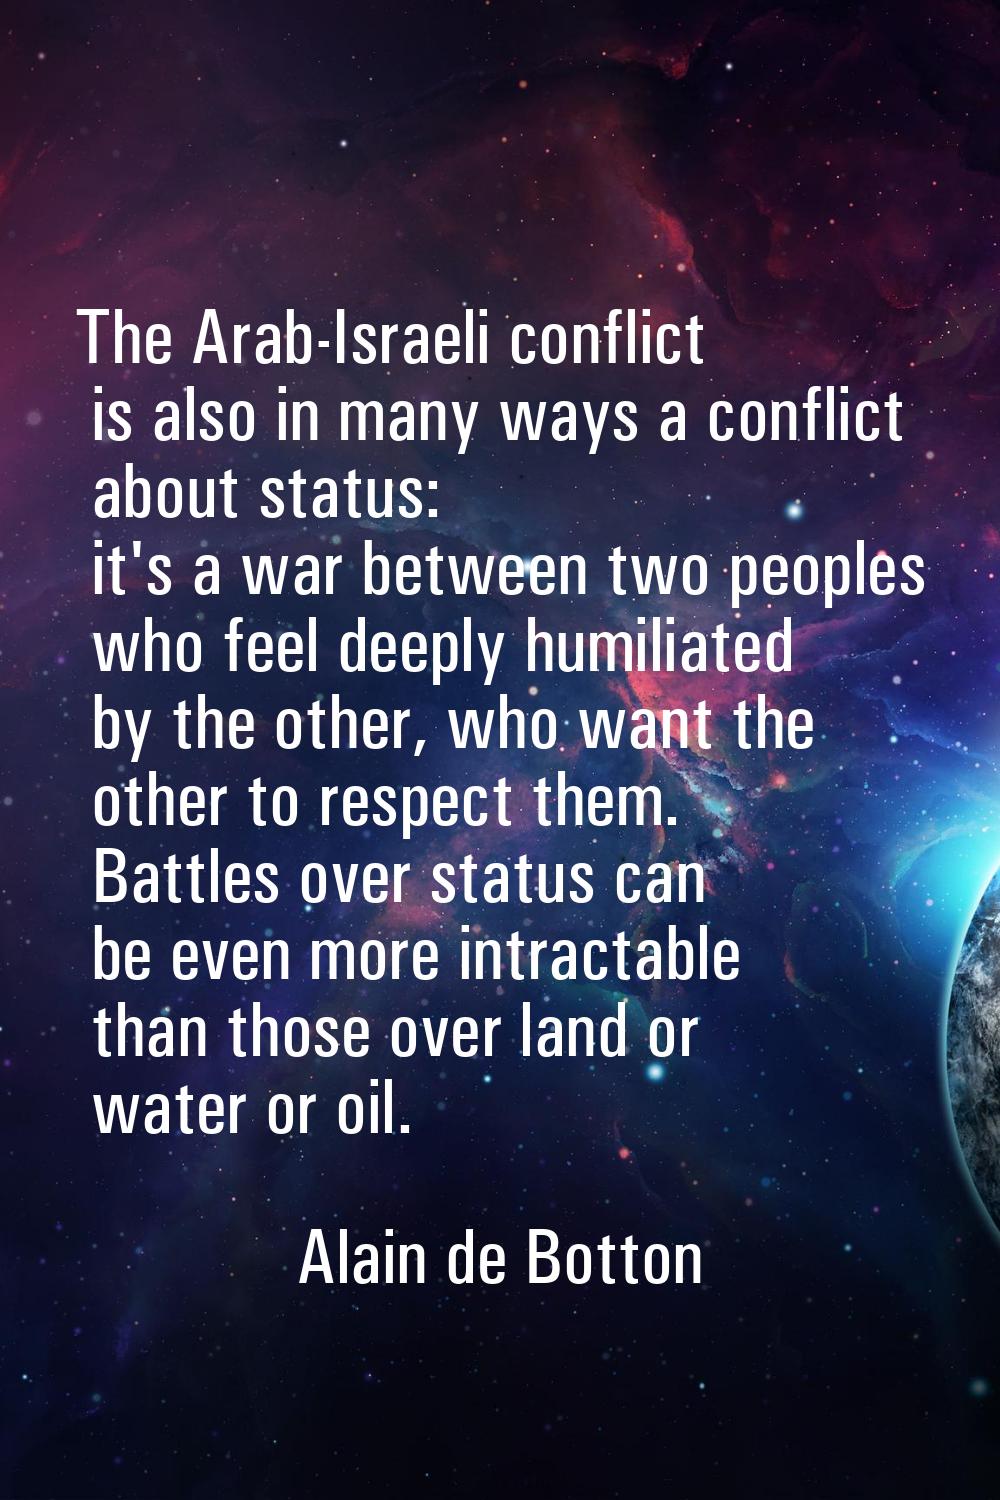 The Arab-Israeli conflict is also in many ways a conflict about status: it's a war between two peop